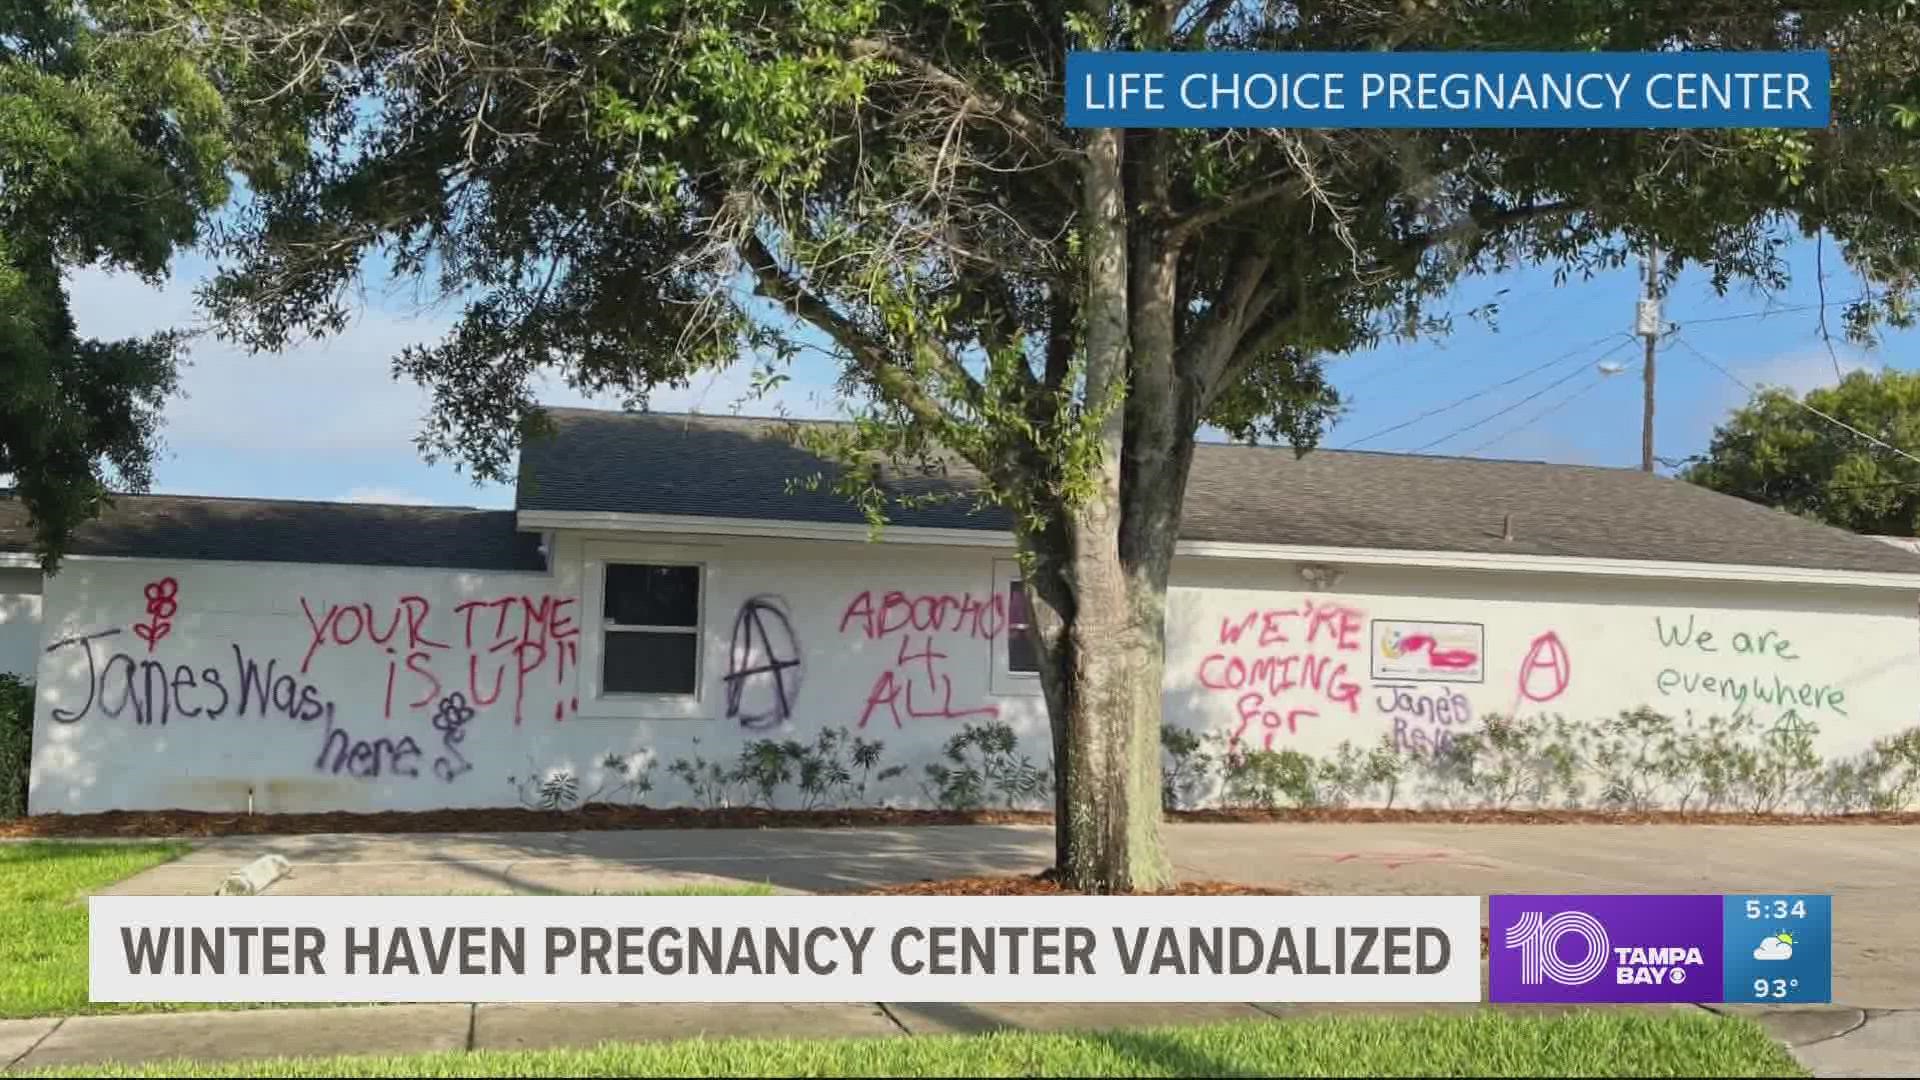 Jane's Revenge, reportedly a pro-abortion group, appeared to cite itself in the vandalism.